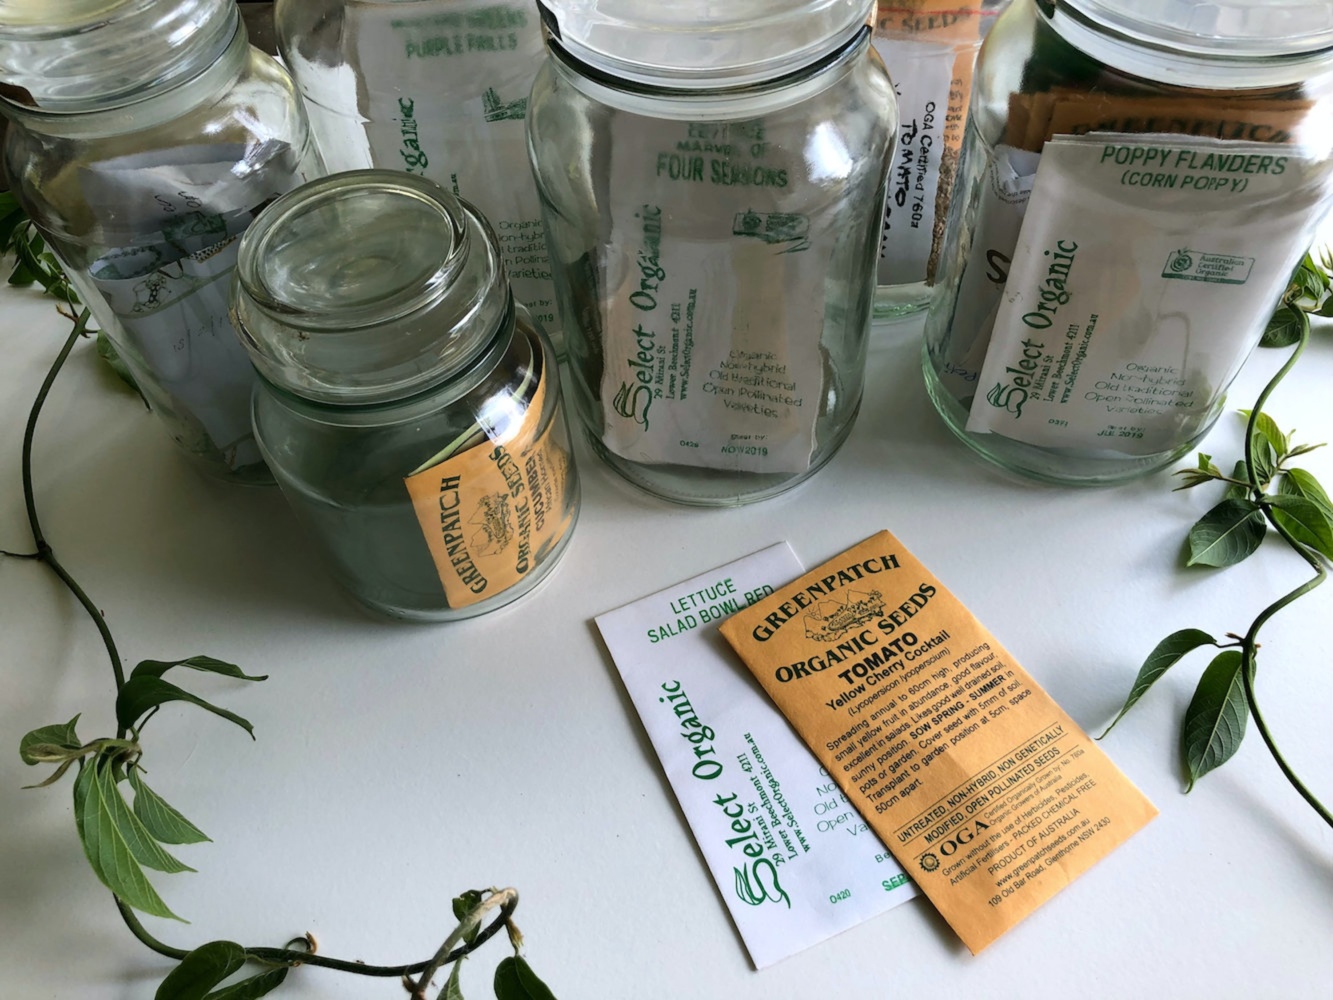 A collection of glass jars filled with vintage-looking paper seed packets. Two packets are out of the jars, one reads 'Greenpatch Organc Seeds Tomato' and the other reads 'Select Organic Lettuce Salad Bowl Red. Be inspired to grow your own in a victory garden at home.